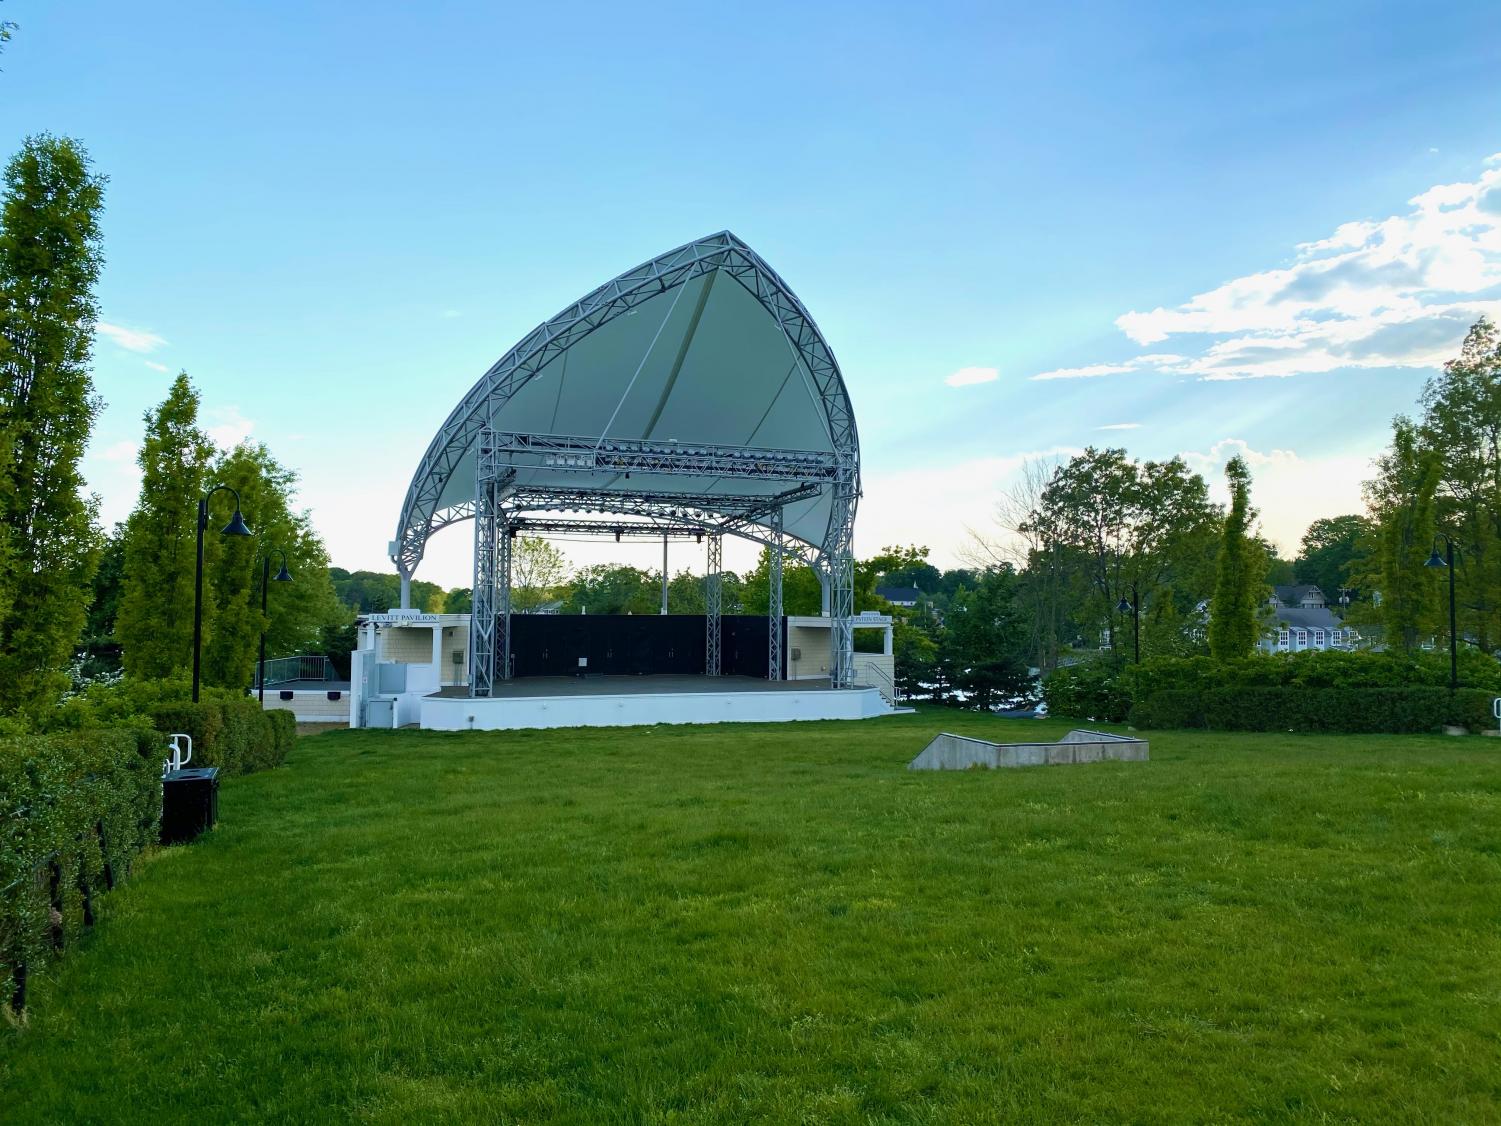 Levitt Pavilion reopens after year-long break, first performance in June – Inklings News